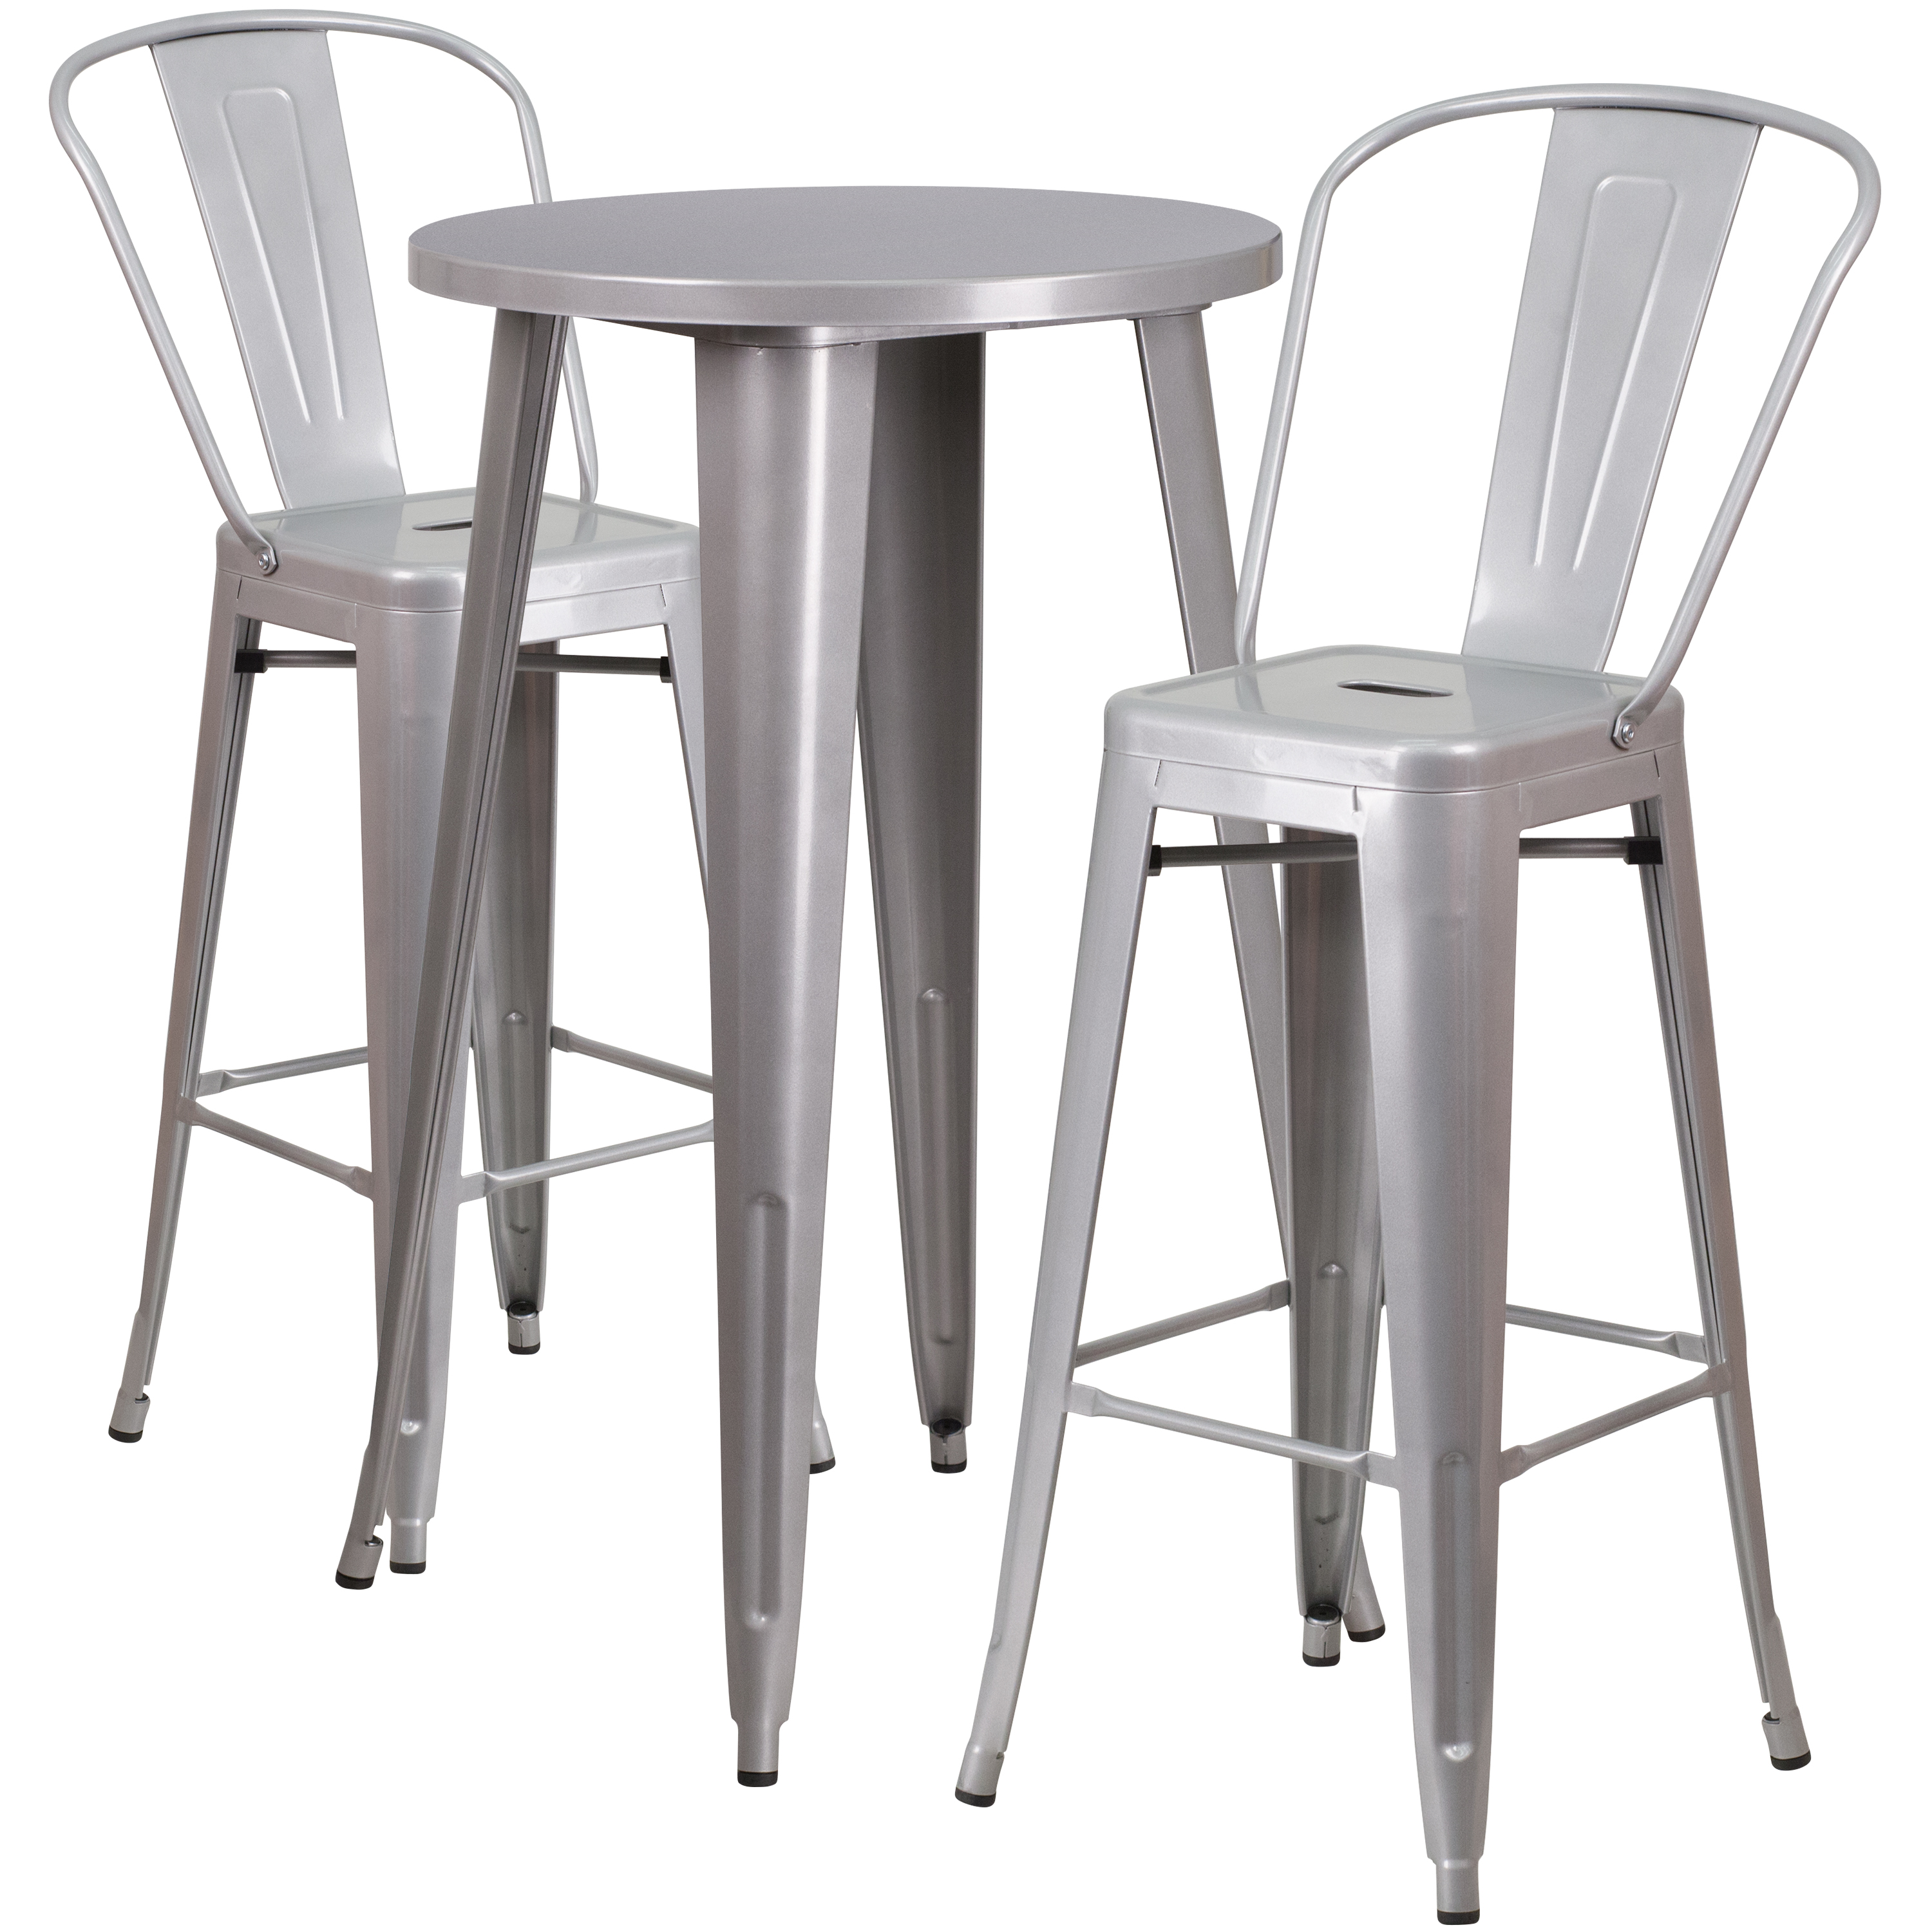 30'' ROUND SILVER METAL INDOOR-OUTDOOR BAR TABLE SET WITH 2 BARSTOOLS 